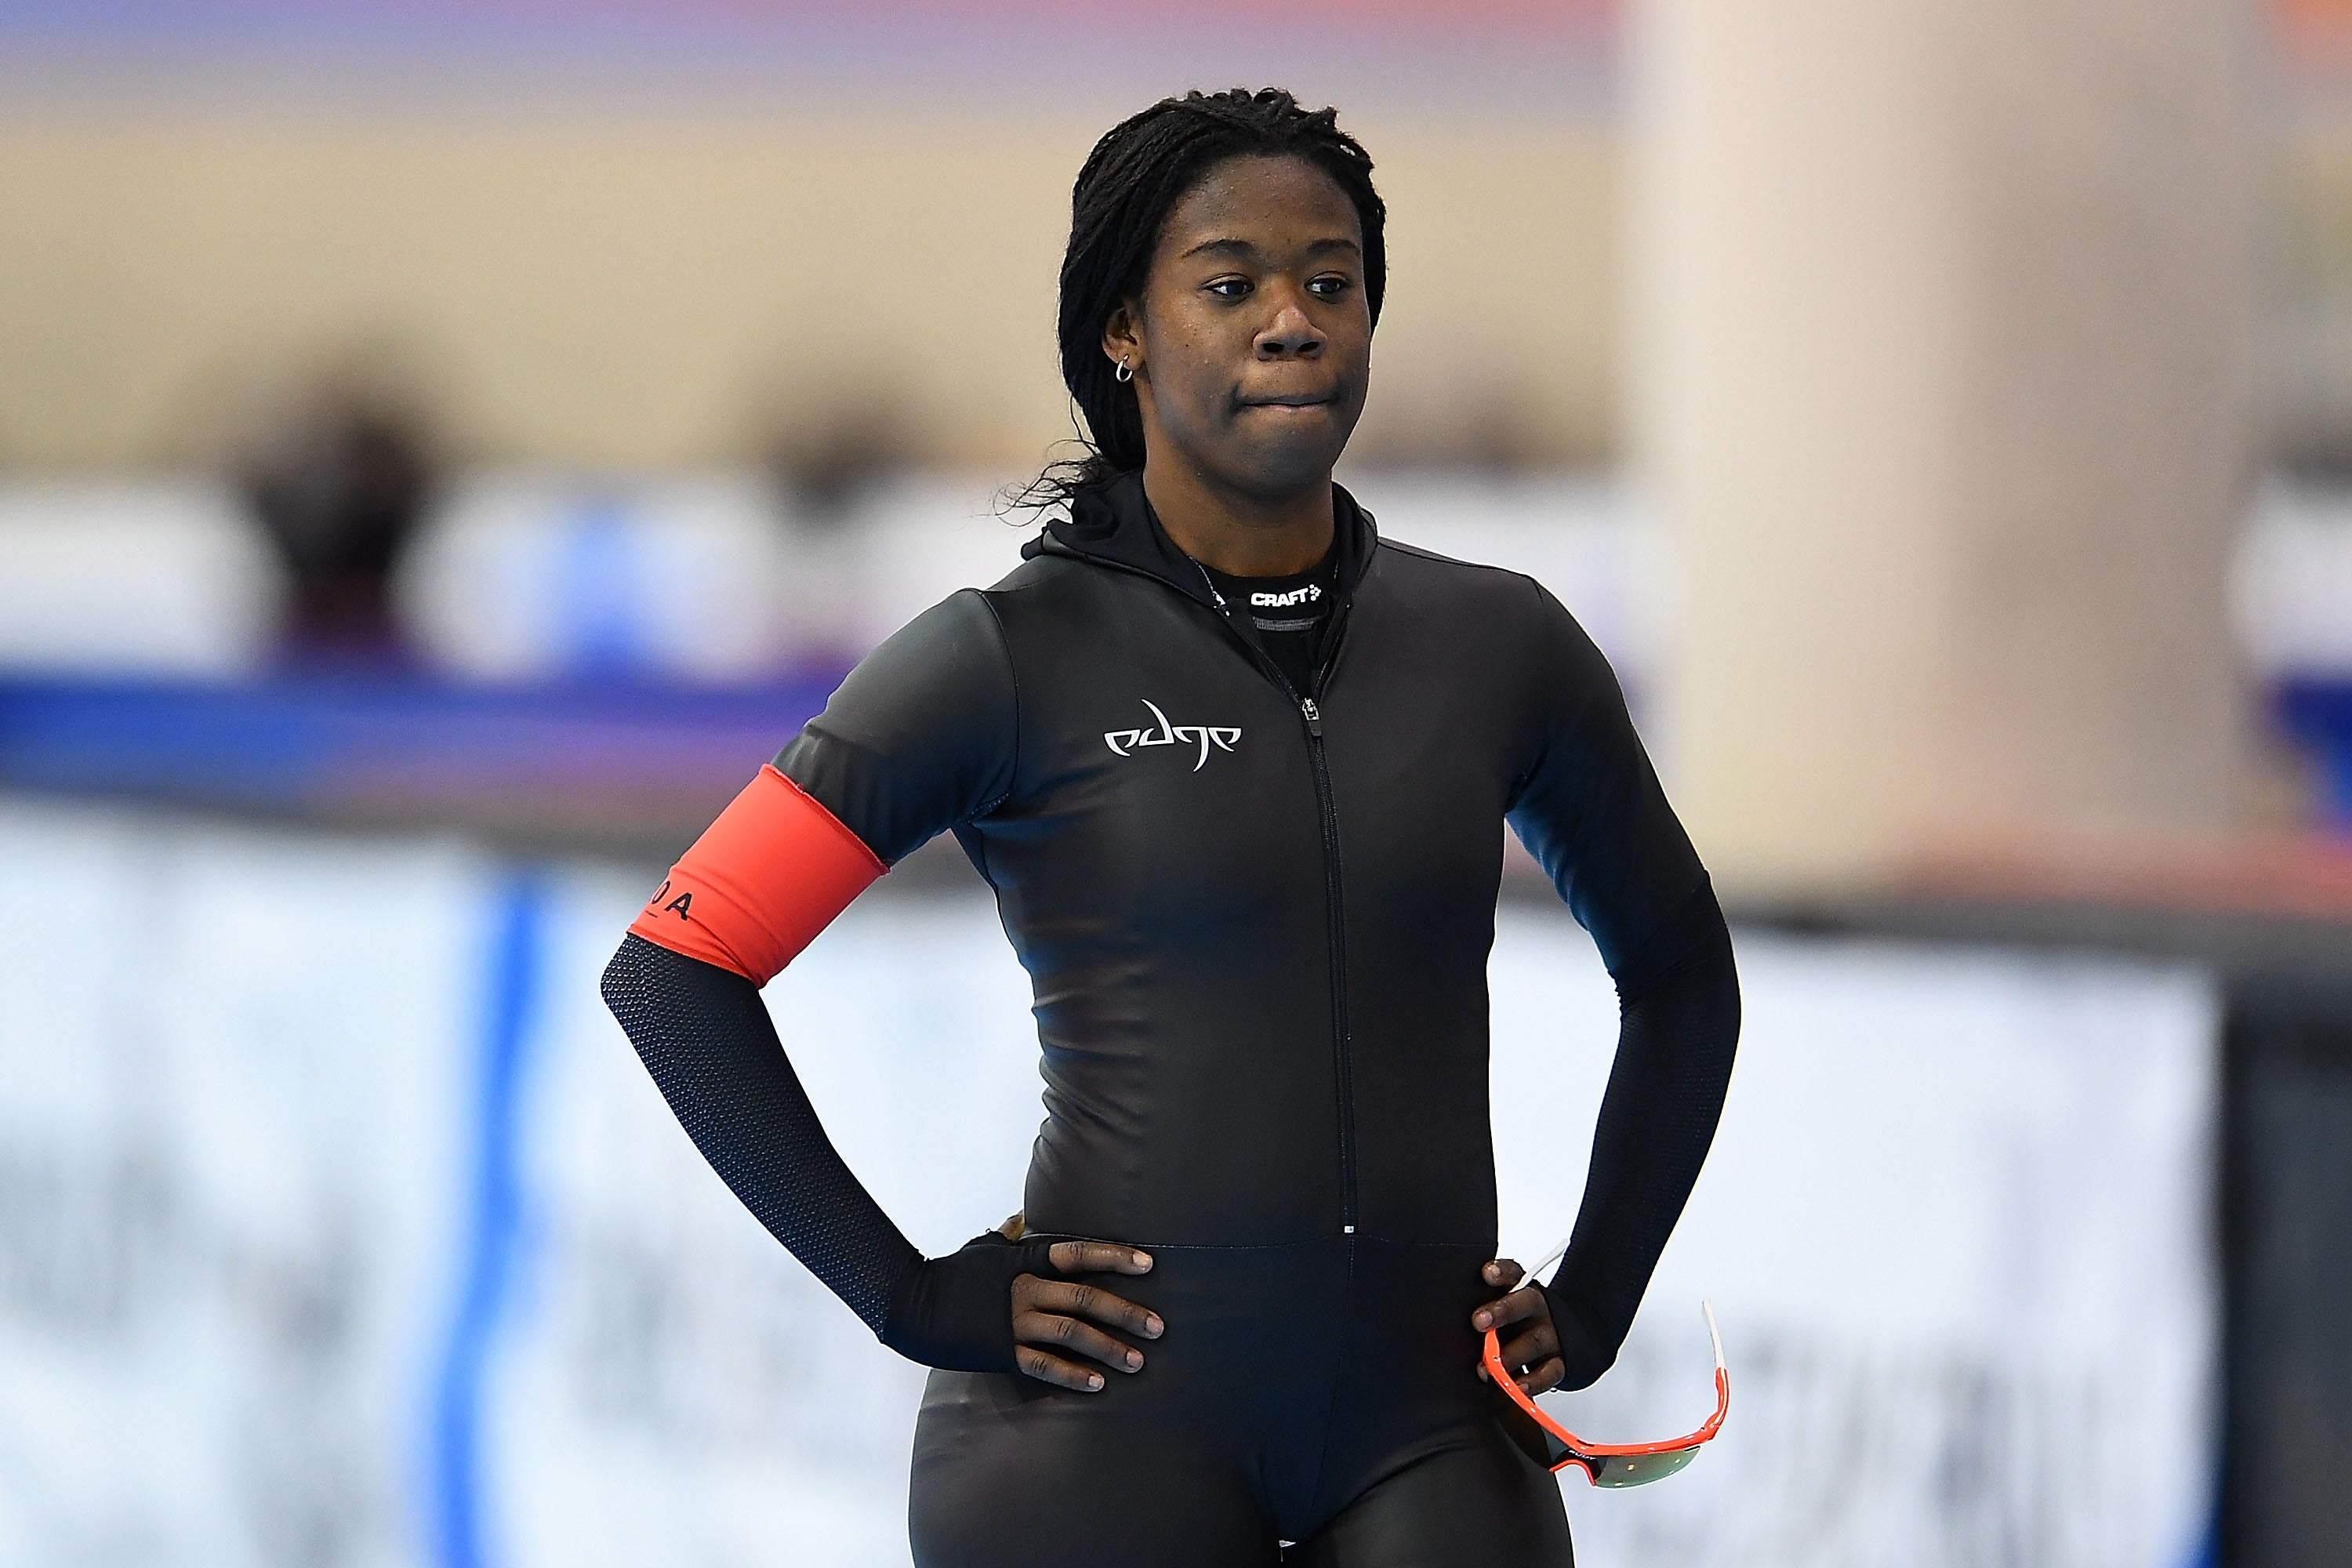 Erin Jackson Picked Up Long-Track Speed Skating 4 Months Ago & Now She's Headed To The Olympics
